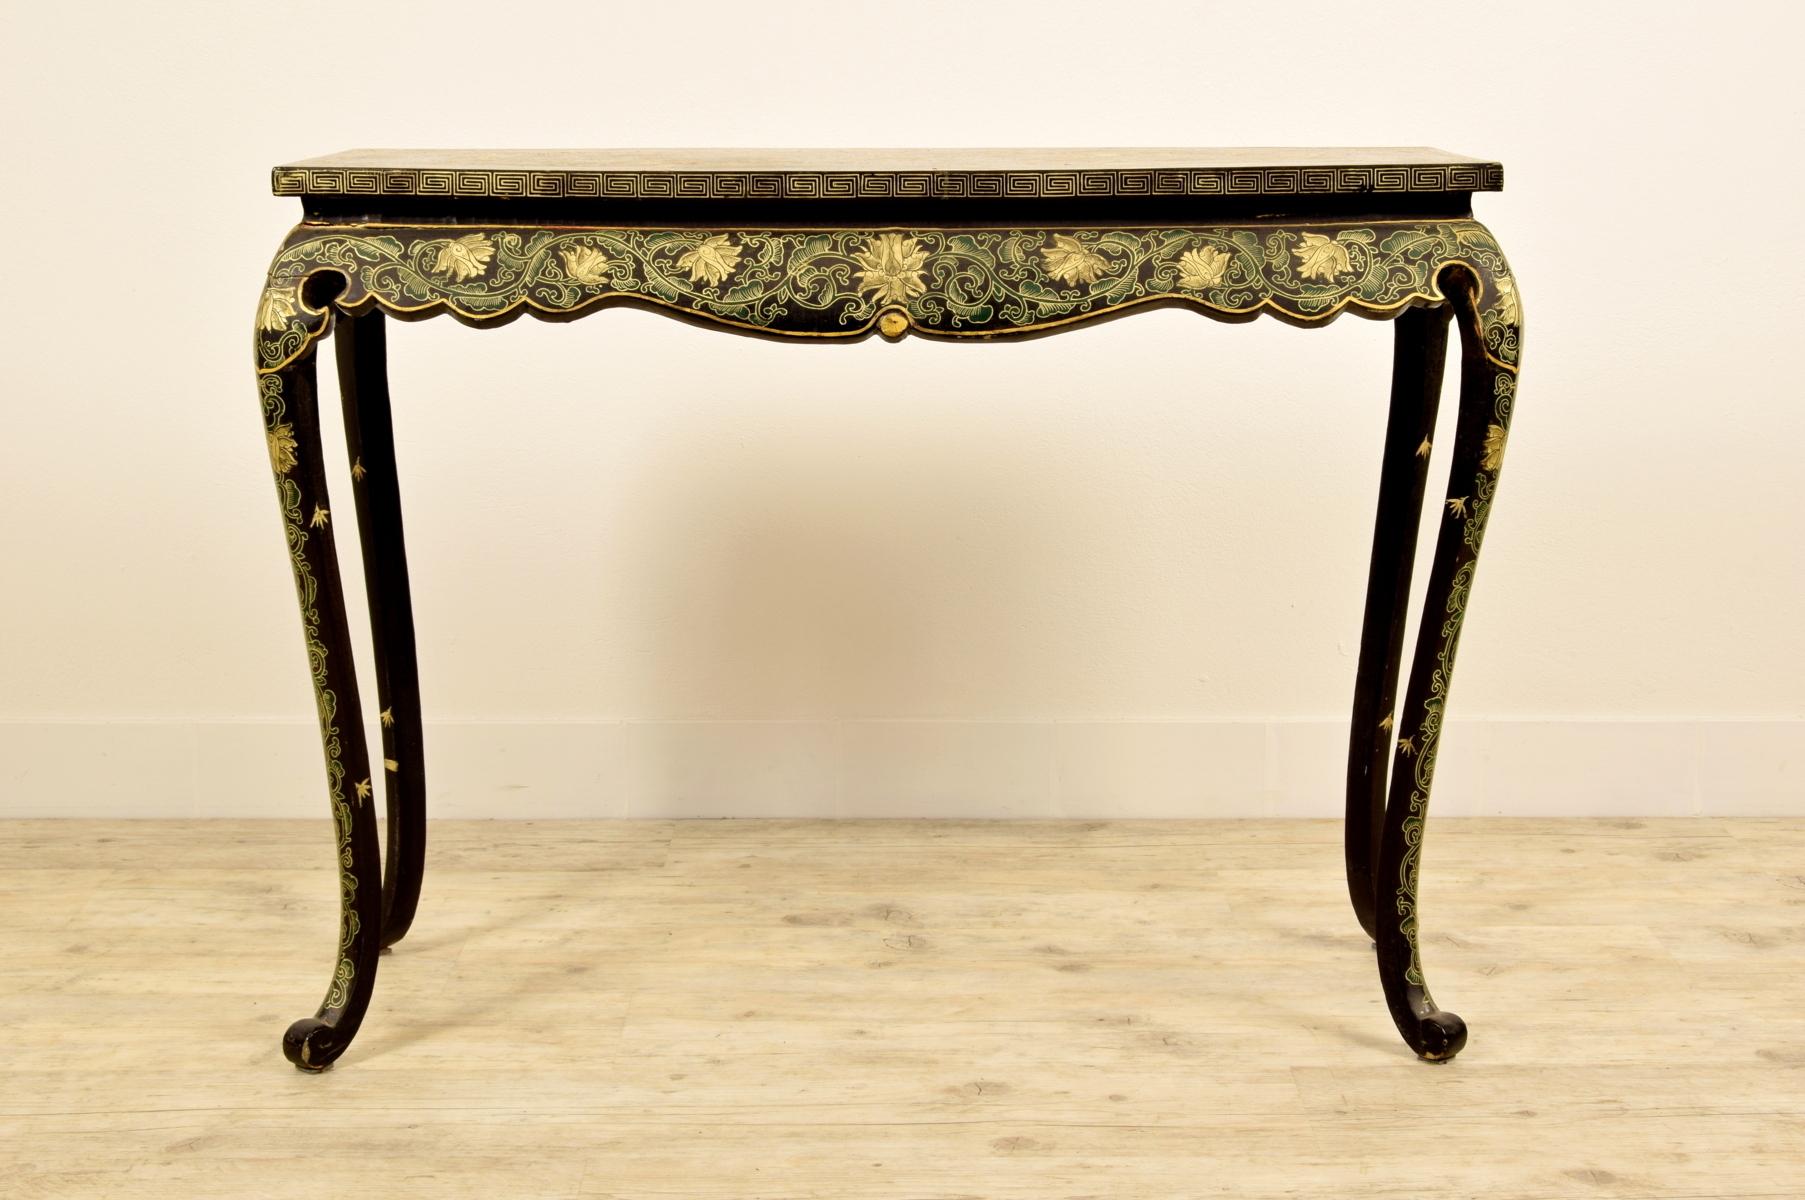 19th century, oriental lacquered and giltwood console table
Size: H 80 x L 110 x P 45 cm

Particular oriental console table, made at the end of the 19th century, in black lacquered wood and polychrome decorations. The console table has a curvy